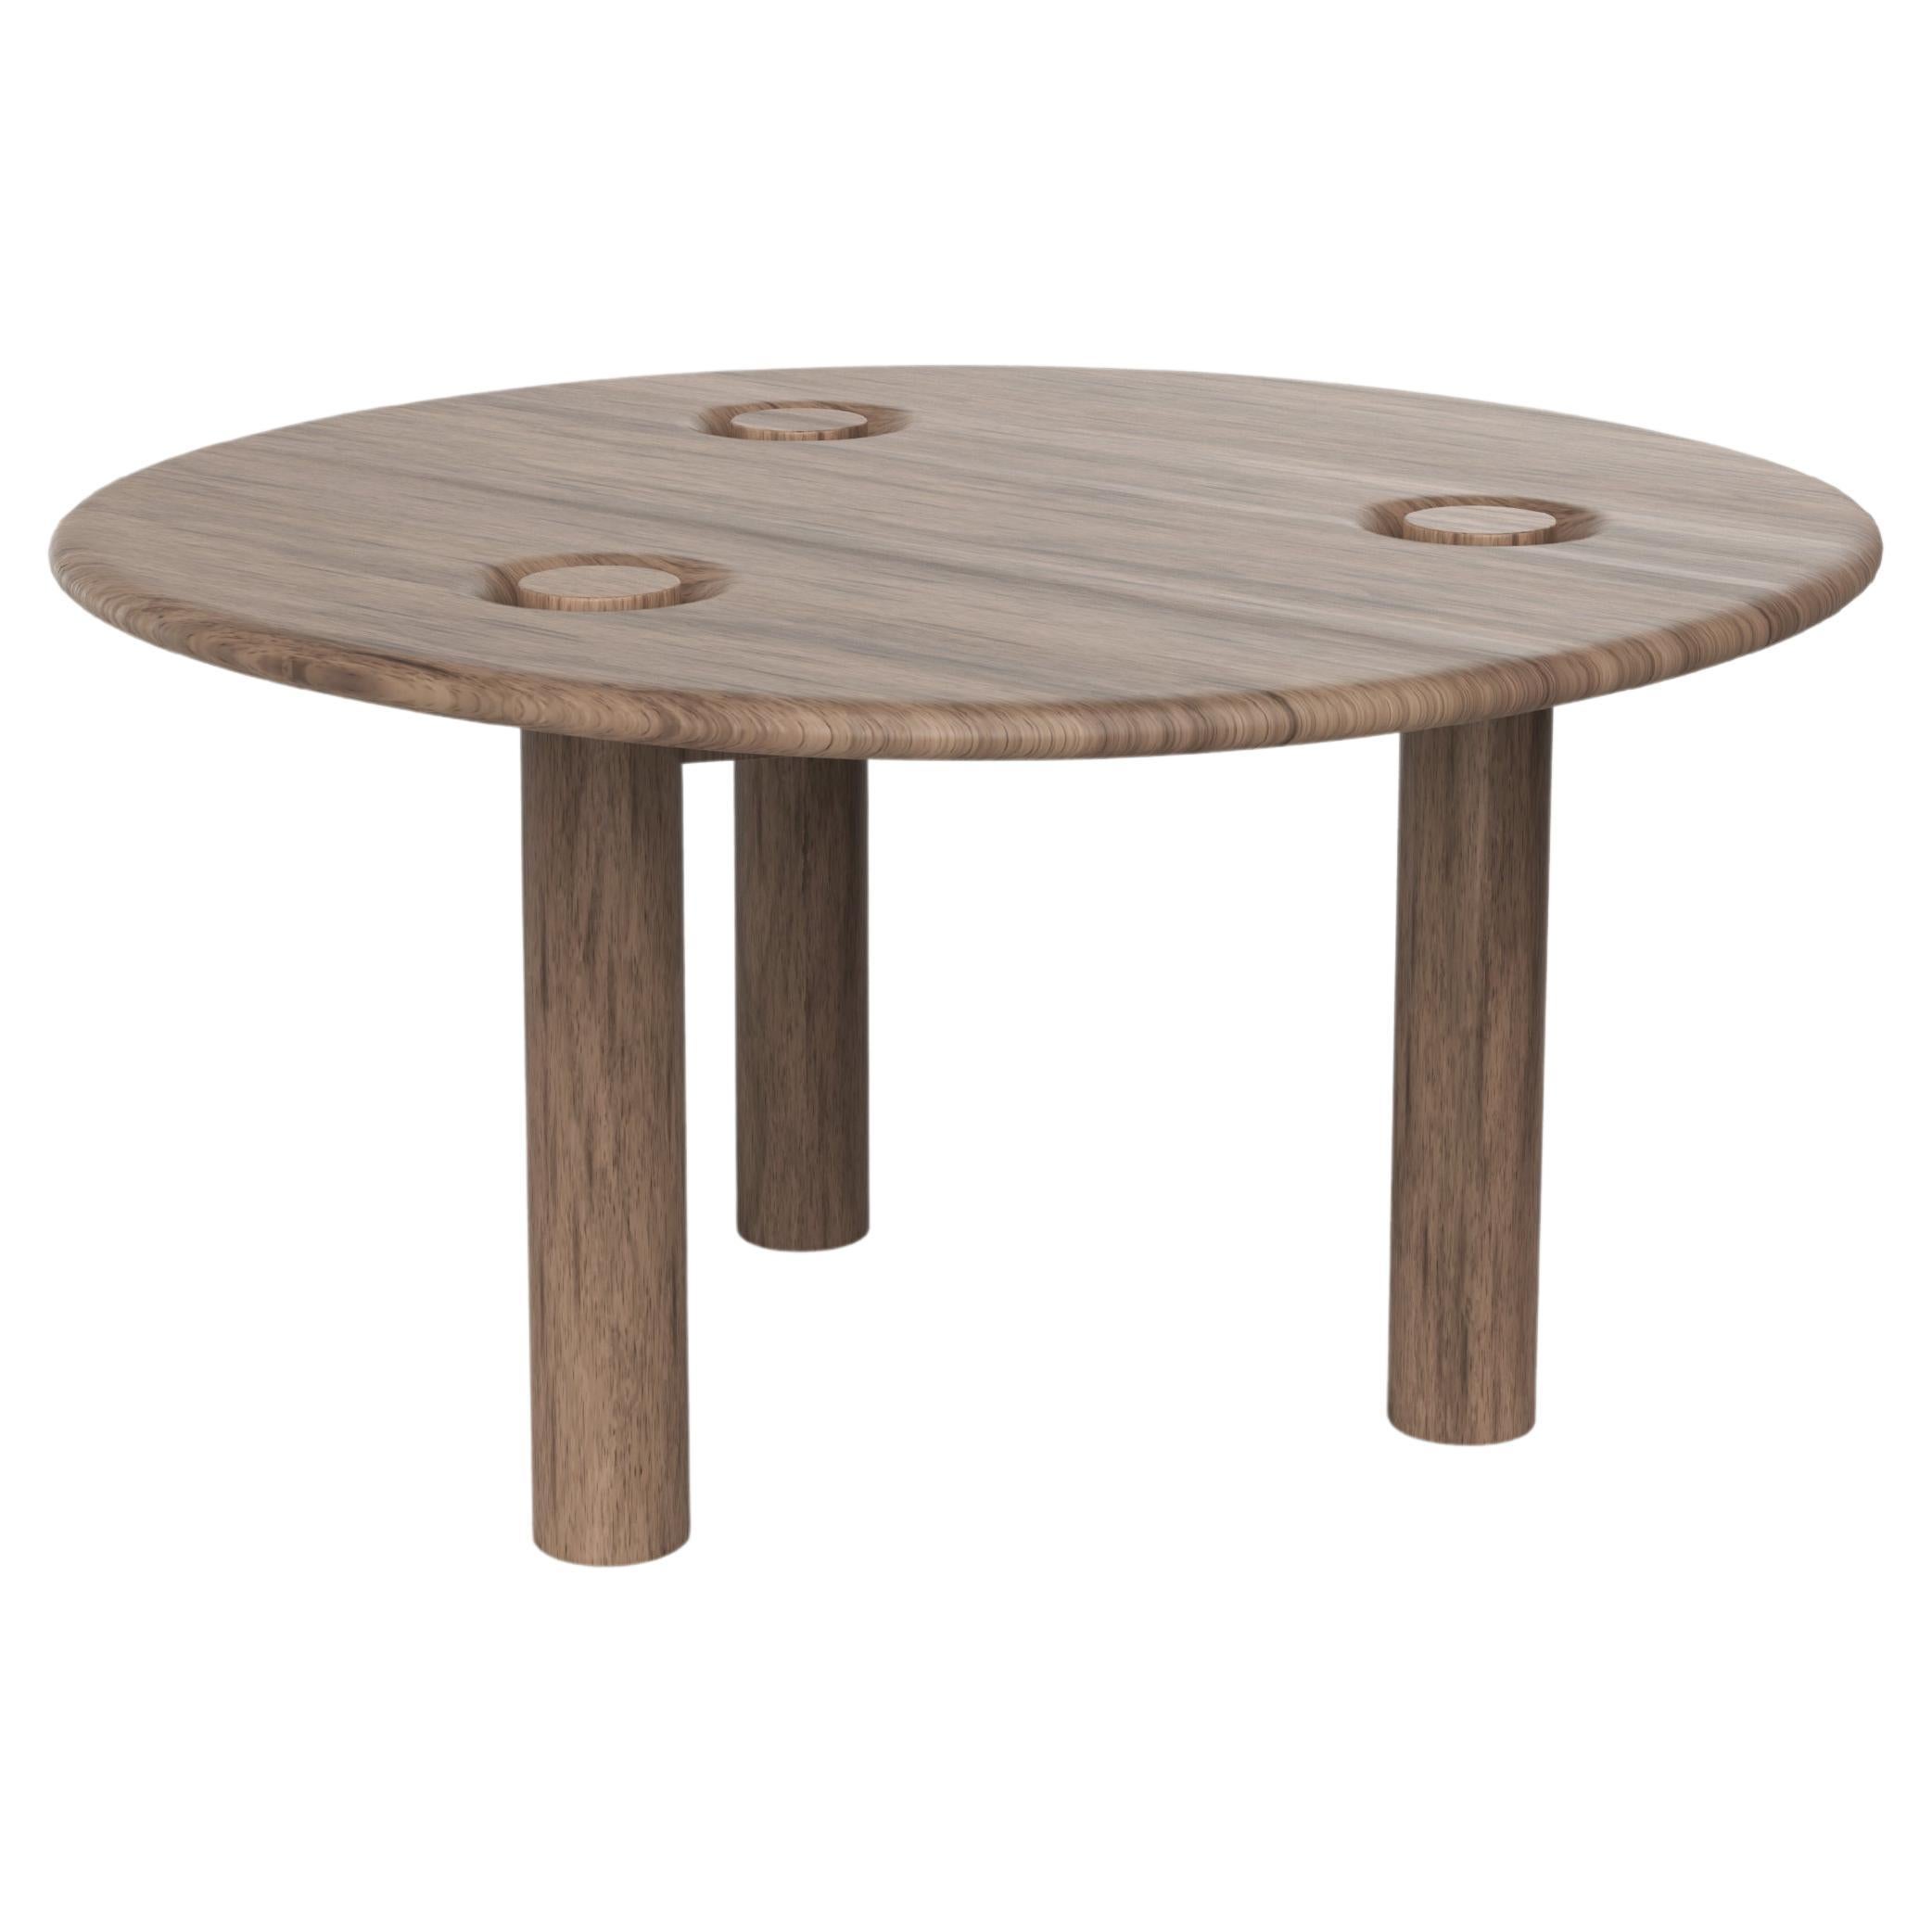 Contemporary Limited Edition Signed Wood Table, Asido V3 by Edizione Limitata For Sale